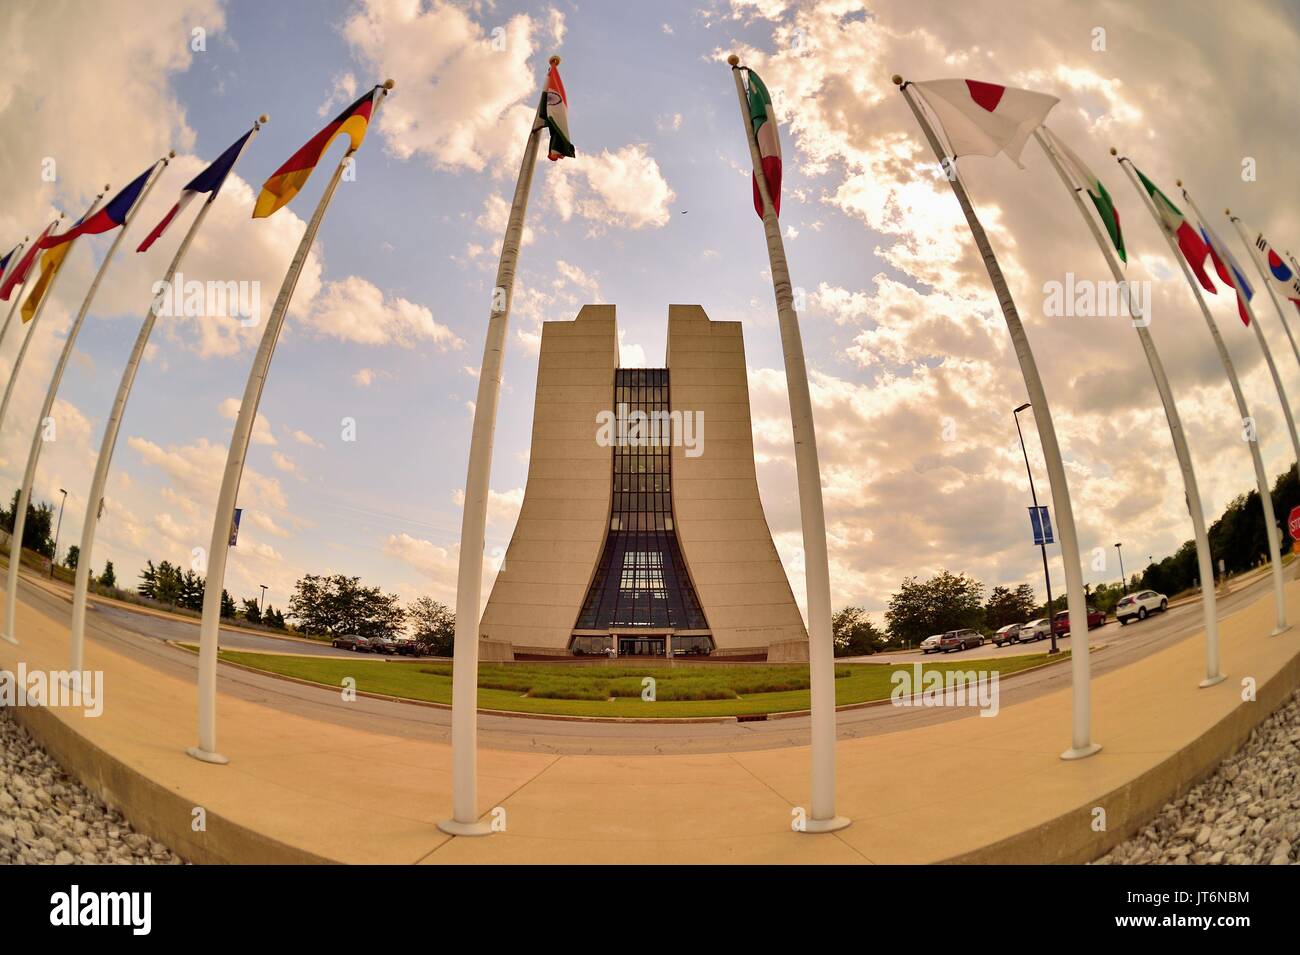 National flags of all participating nations at CERN, the European Organization for Nuclear Research at Fermilab in Batavia, Illinois, USA. Stock Photo